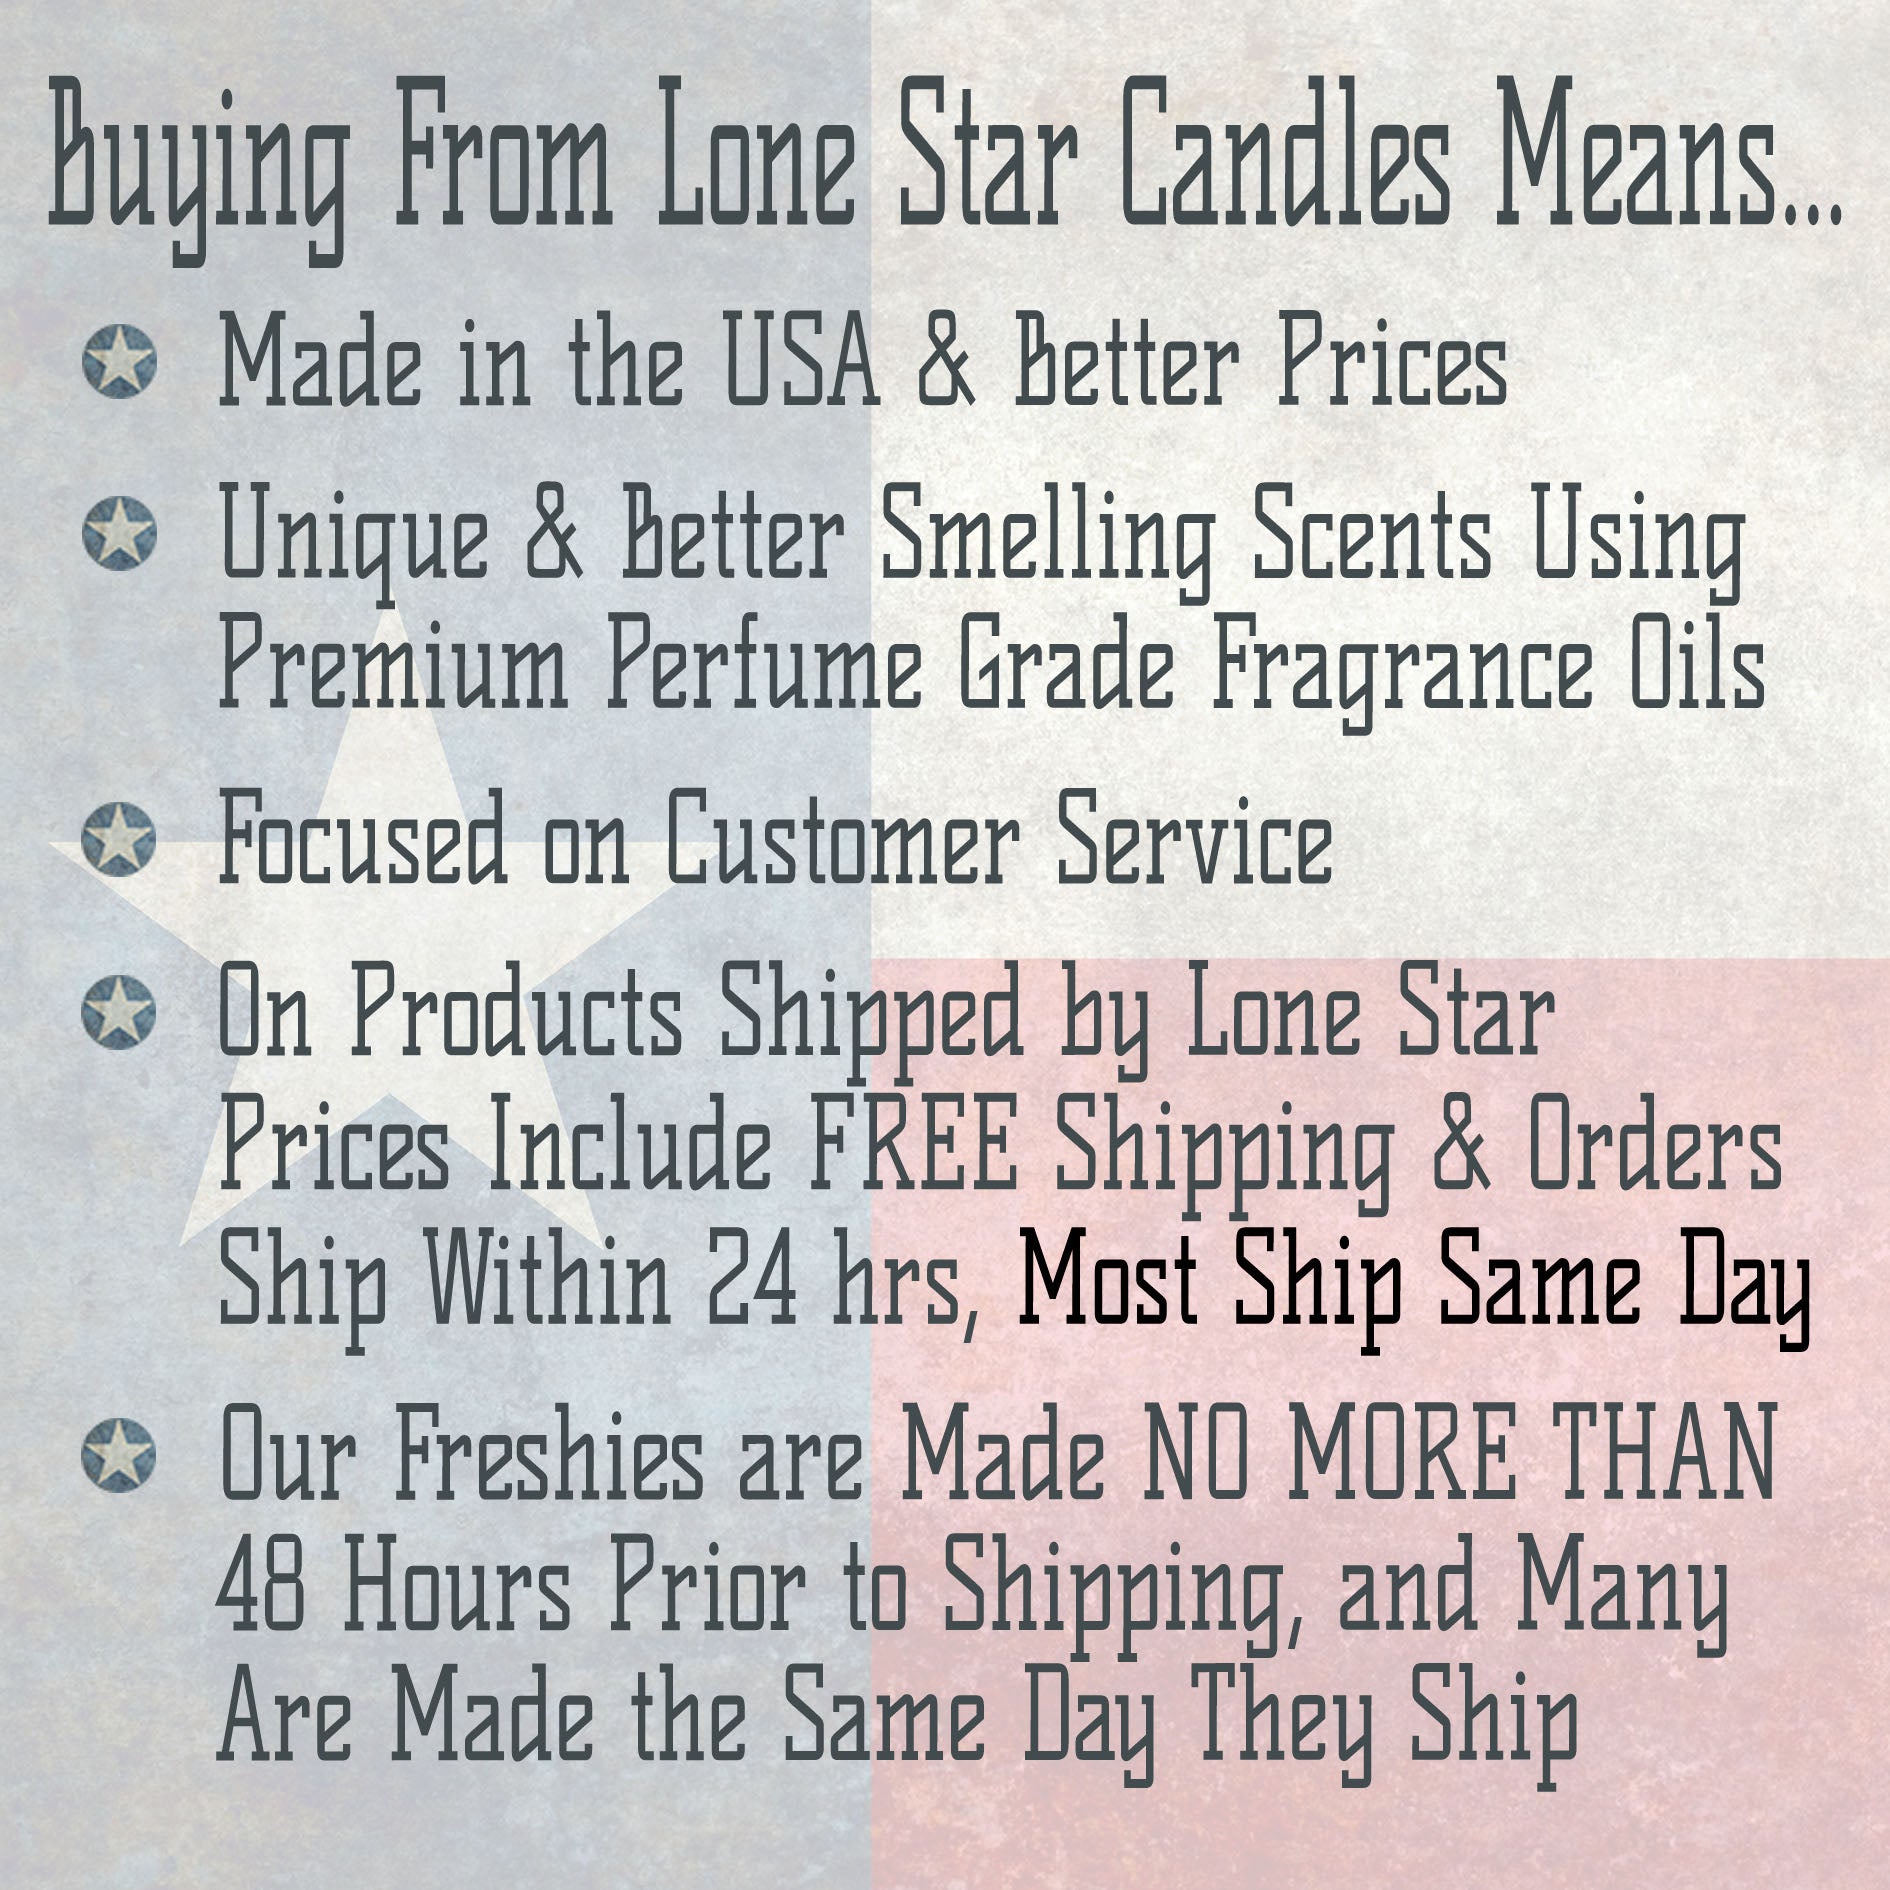 Strawberry Leather, Lone Star Candles & More's Premium Strongly Scented Freshies, Genuine Leather Aroma with Sweet & Juicy Strawberries, Car & Air Freshener, USA & Texas Made, High Heel 1-Pack